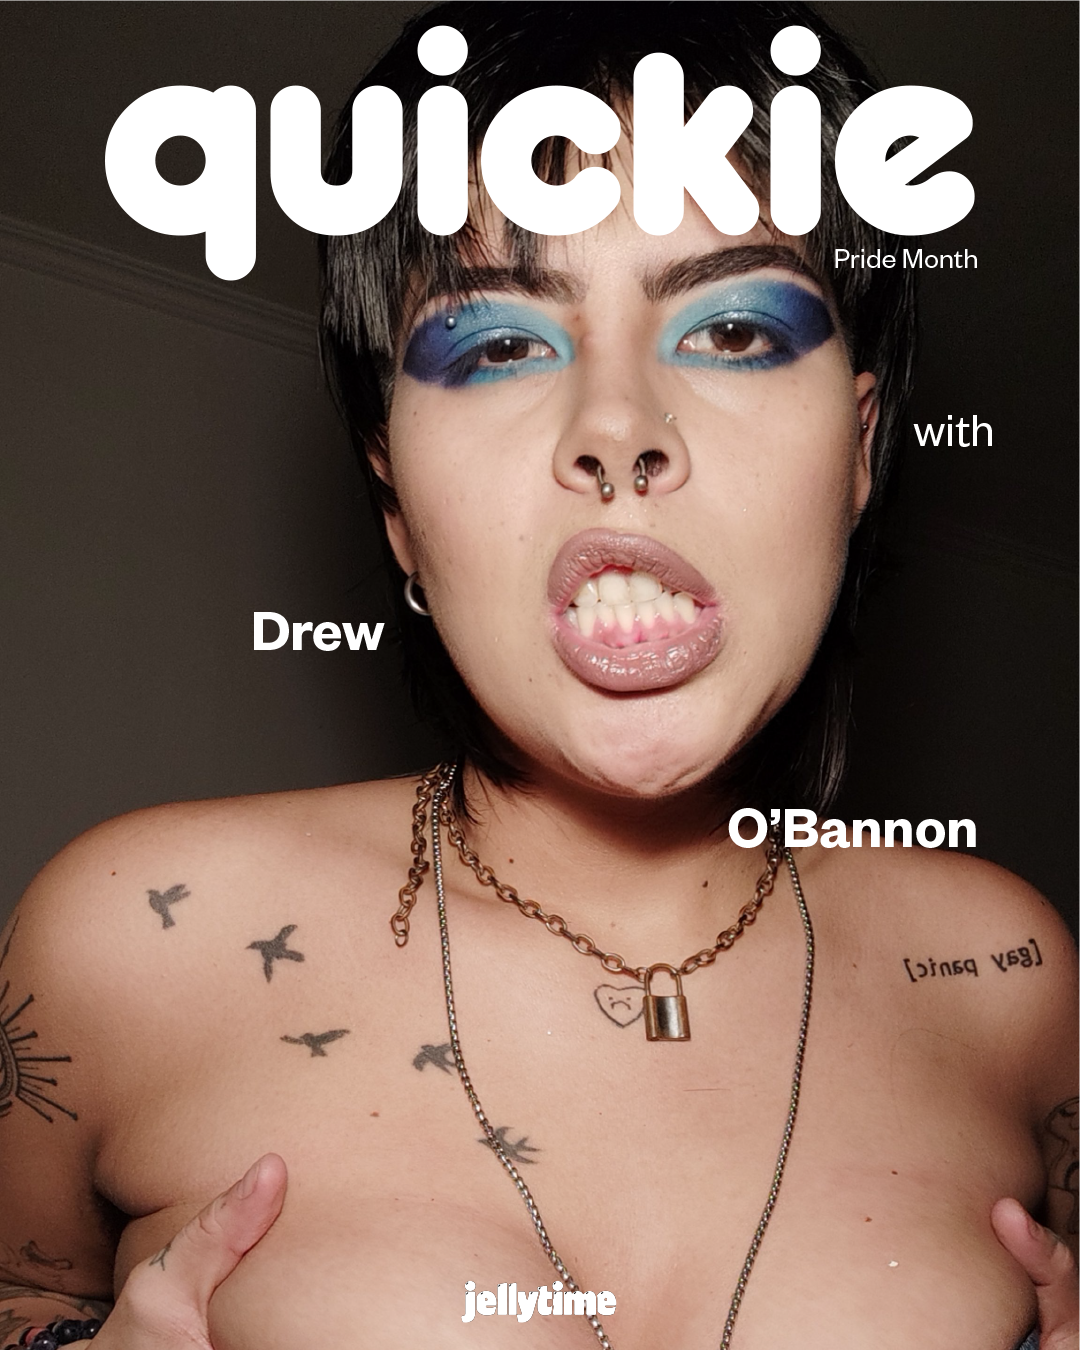 Quickie with Drew O'Bannon